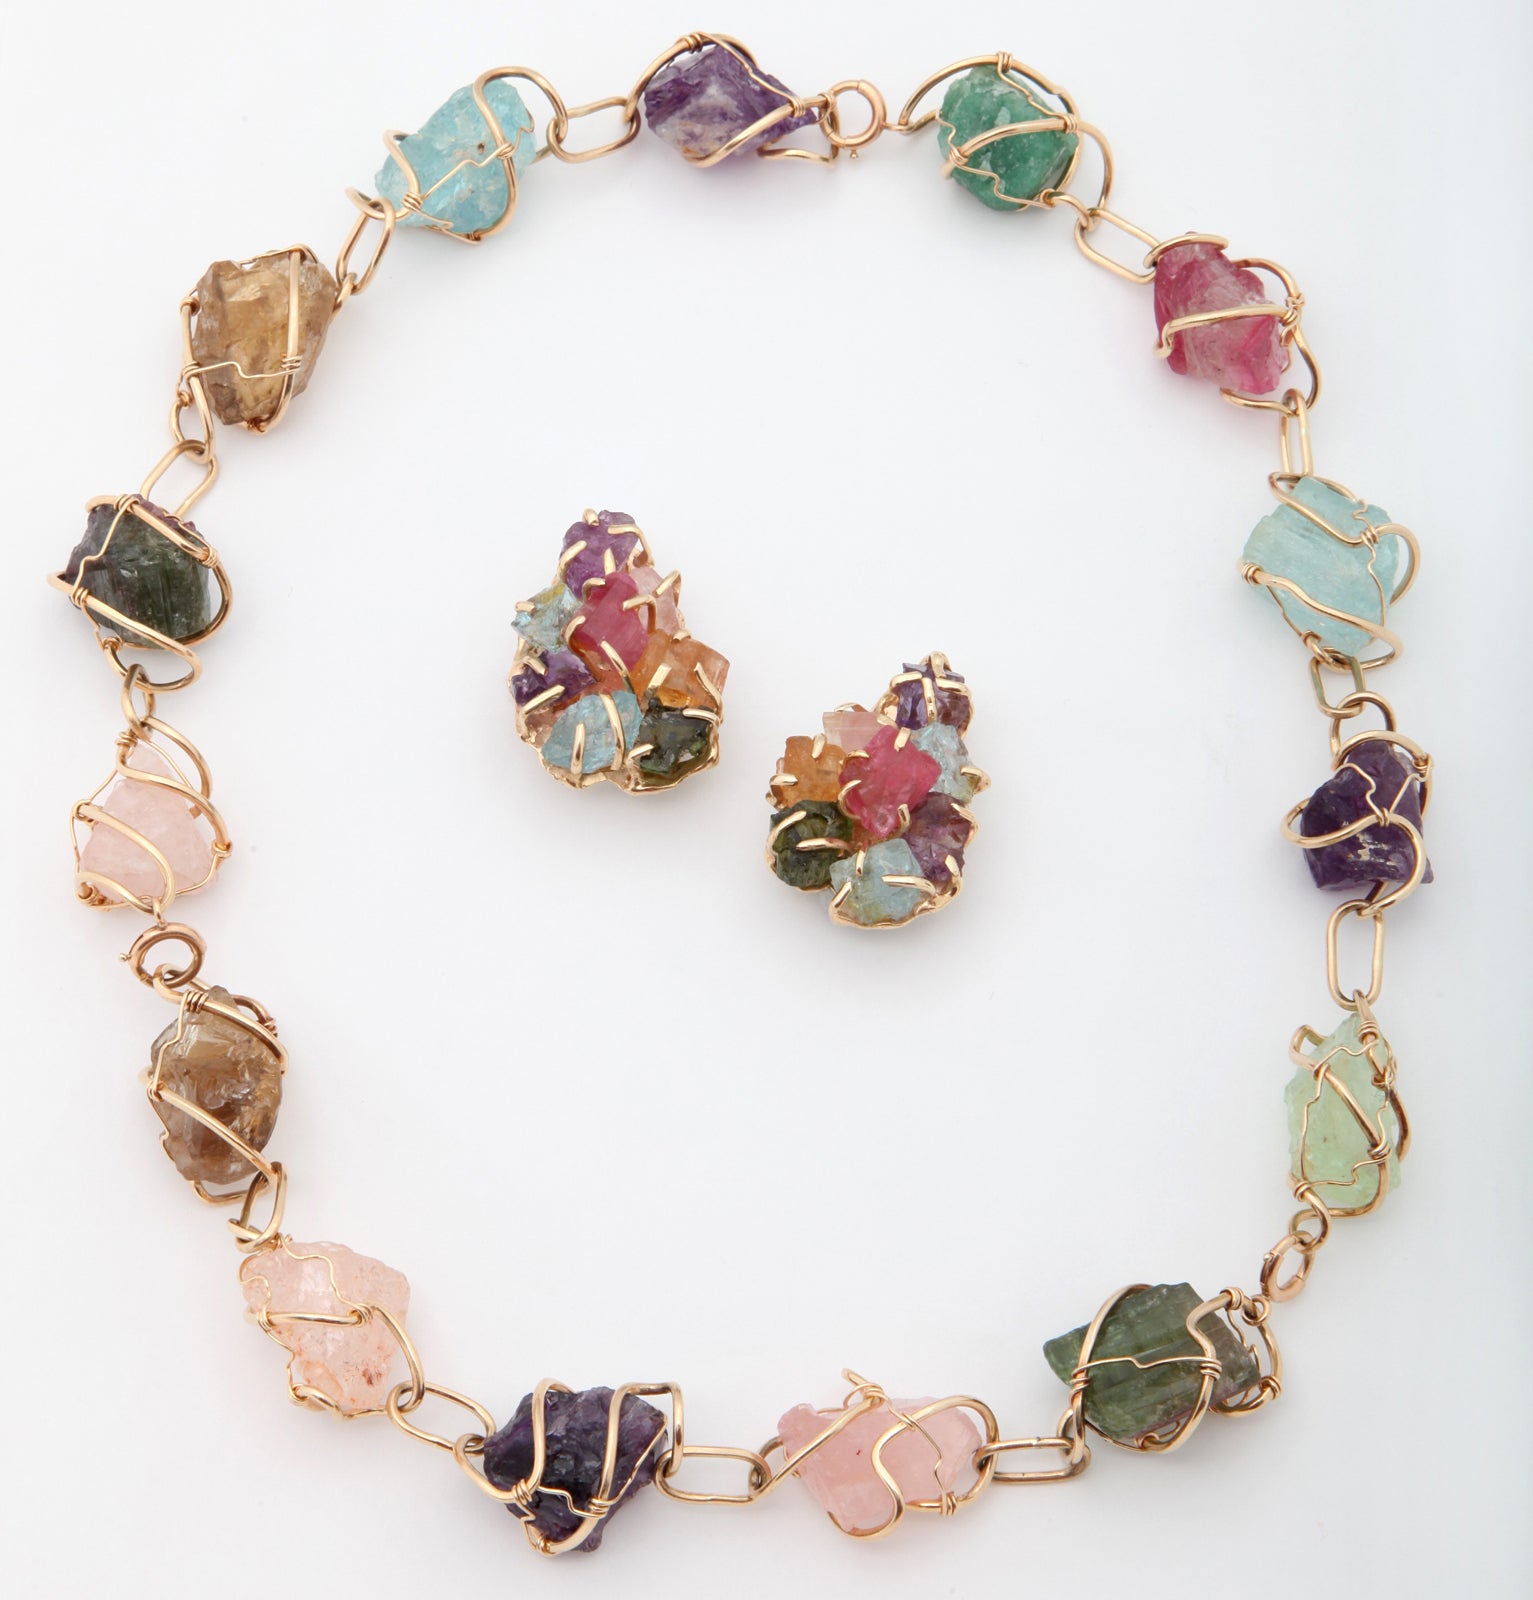 Multi-Colored Stone Necklace and Three Bracelets Combination with Matching Earrings